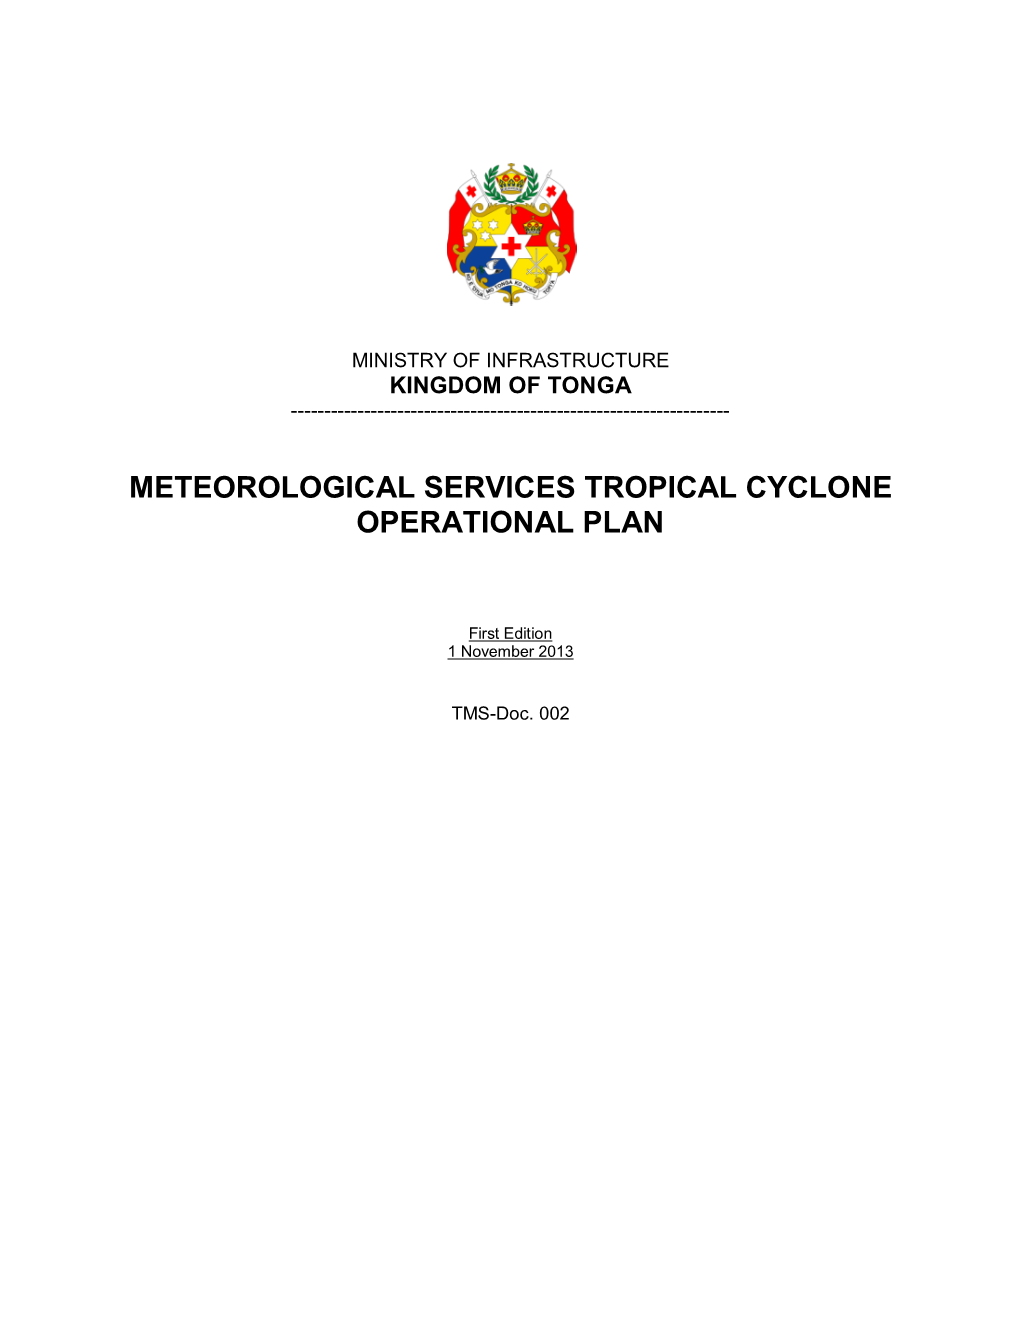 Meteorological Services Tropical Cyclone Operational Plan